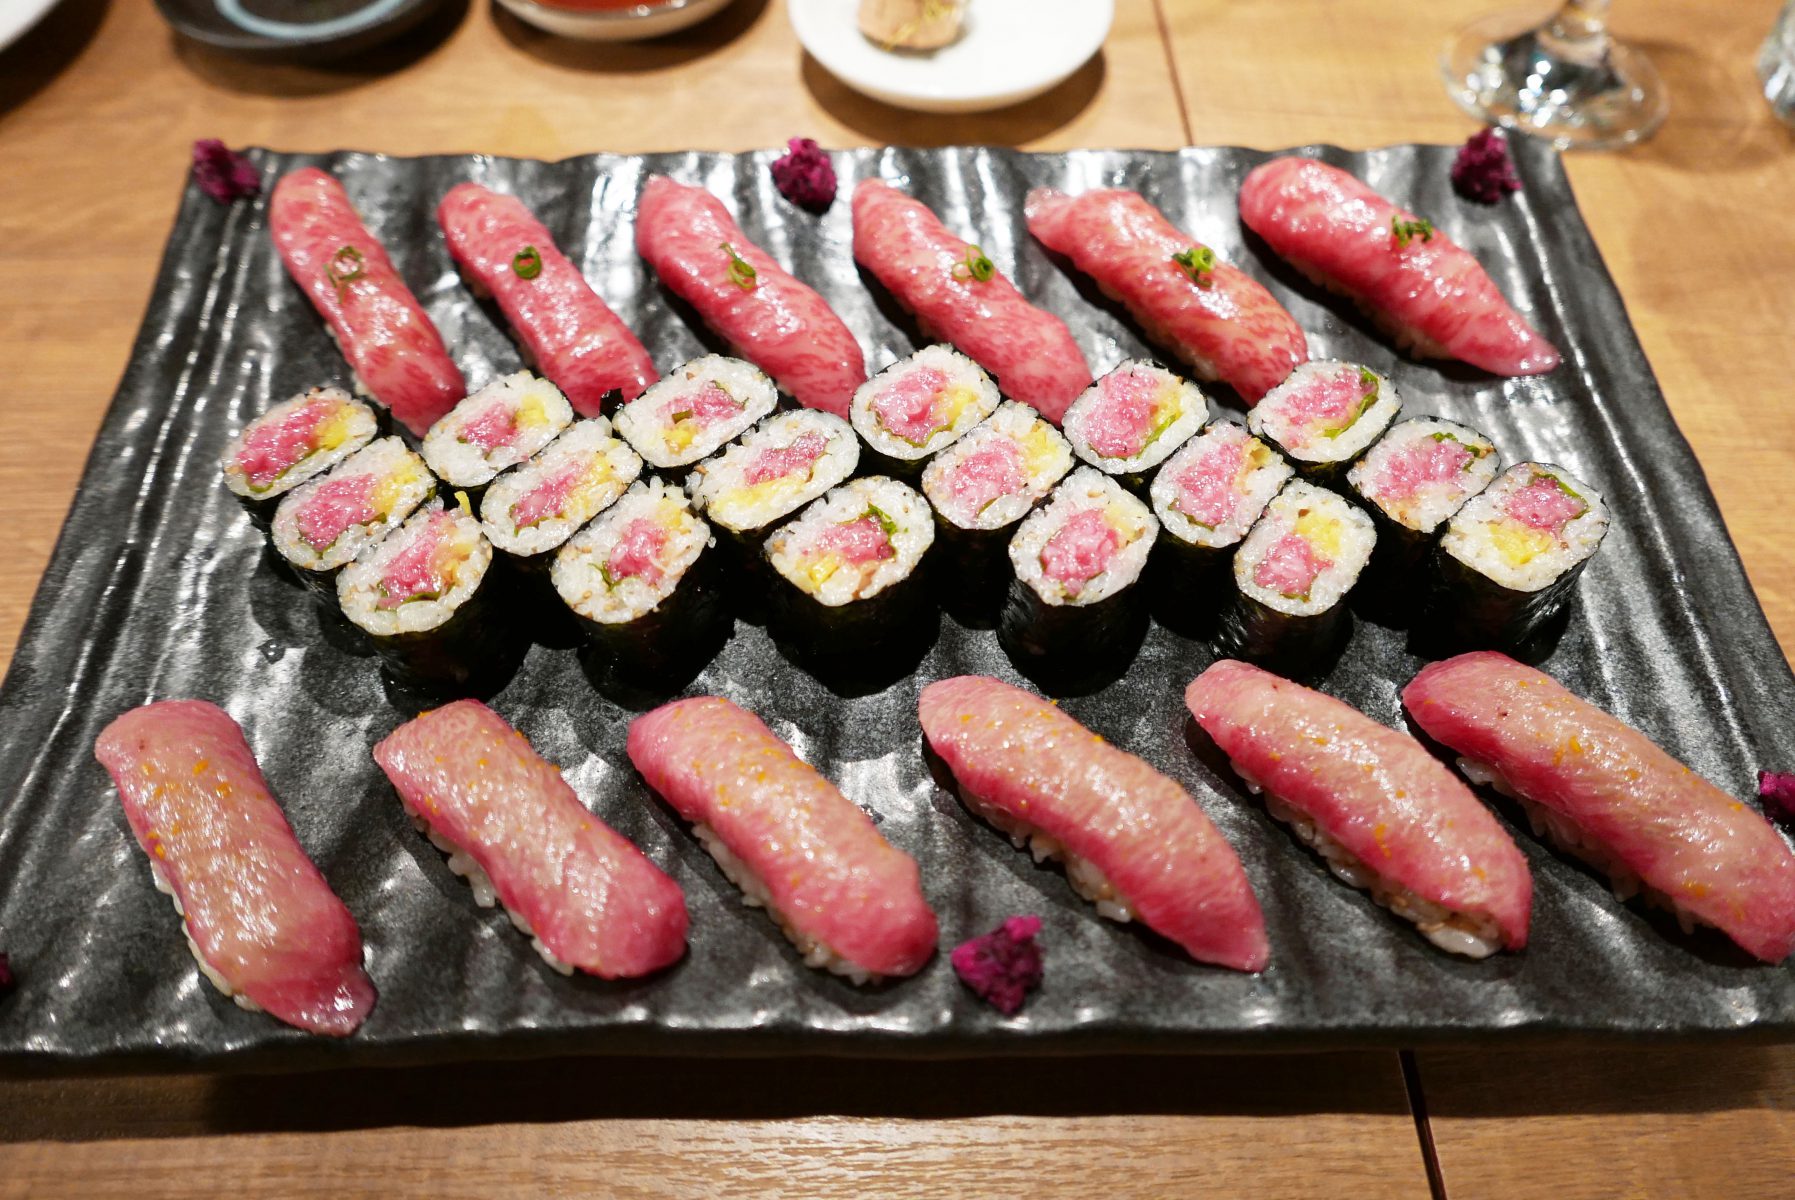 This is not otoro: raw beef sushi and rolls